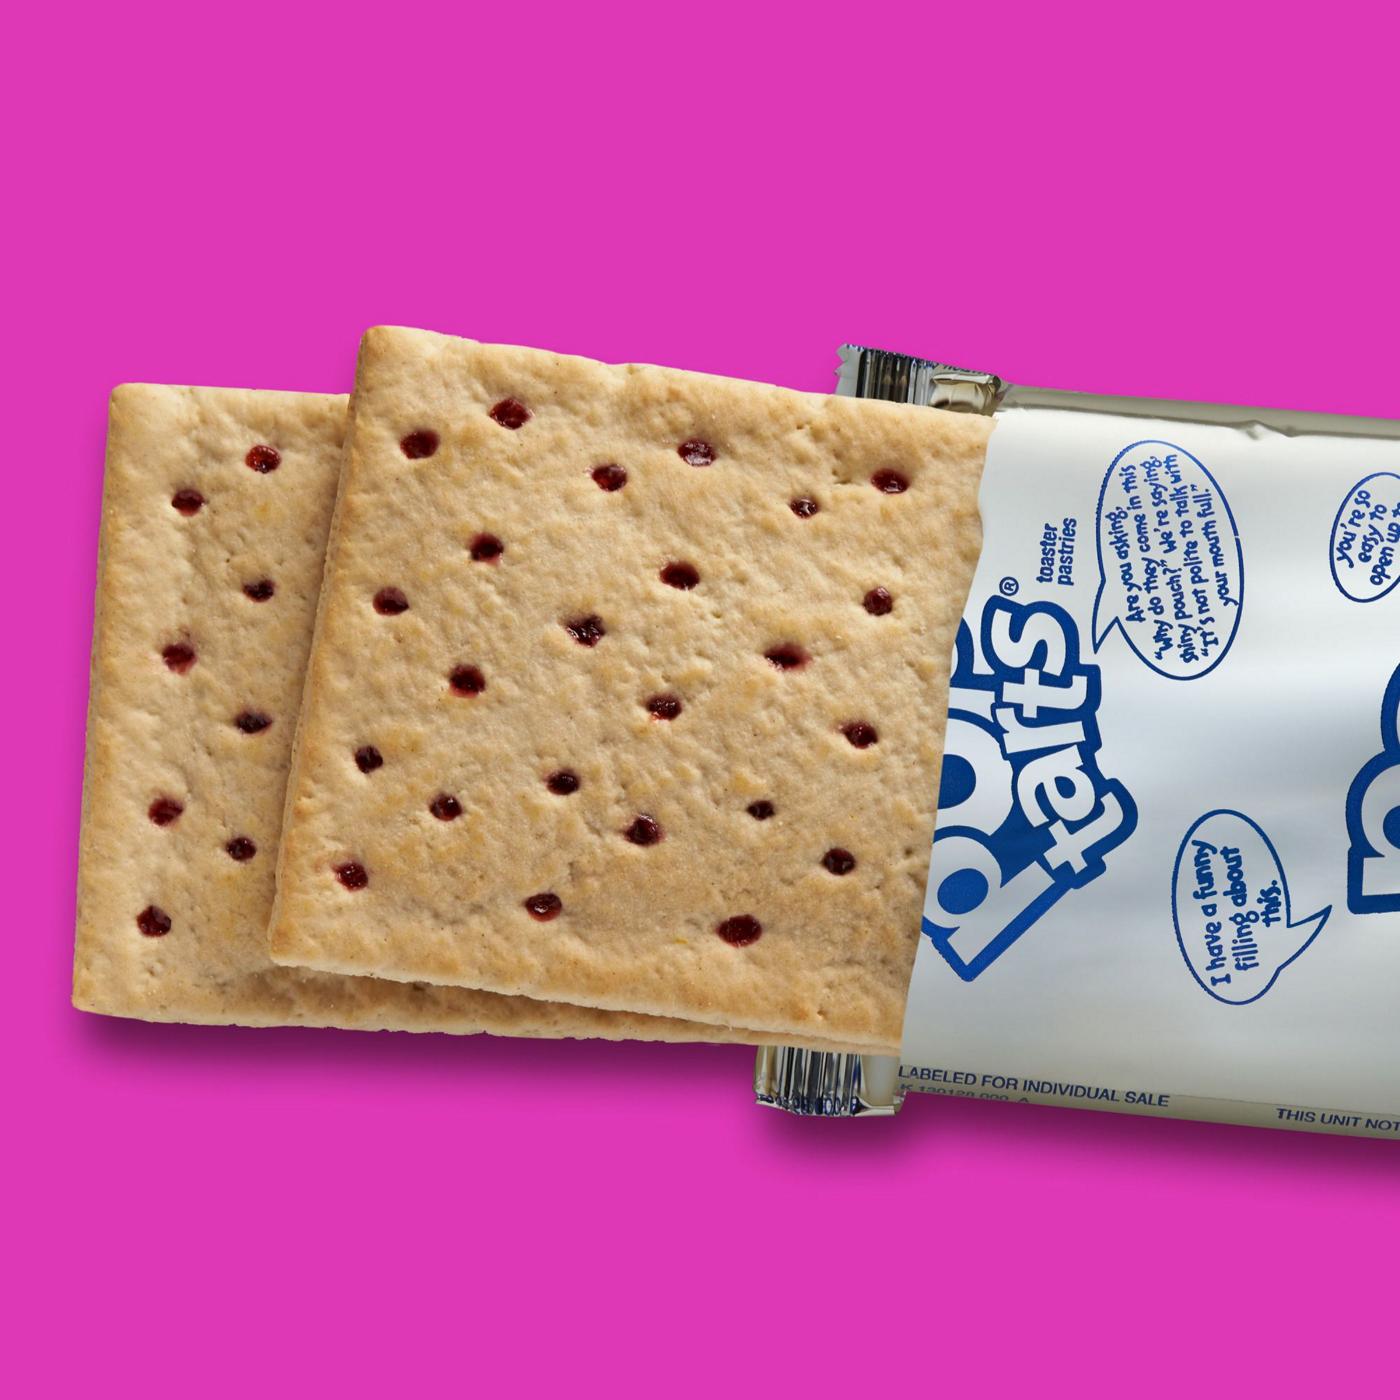 Pop-Tarts Unfrosted Strawberry Toaster Pastries; image 2 of 11